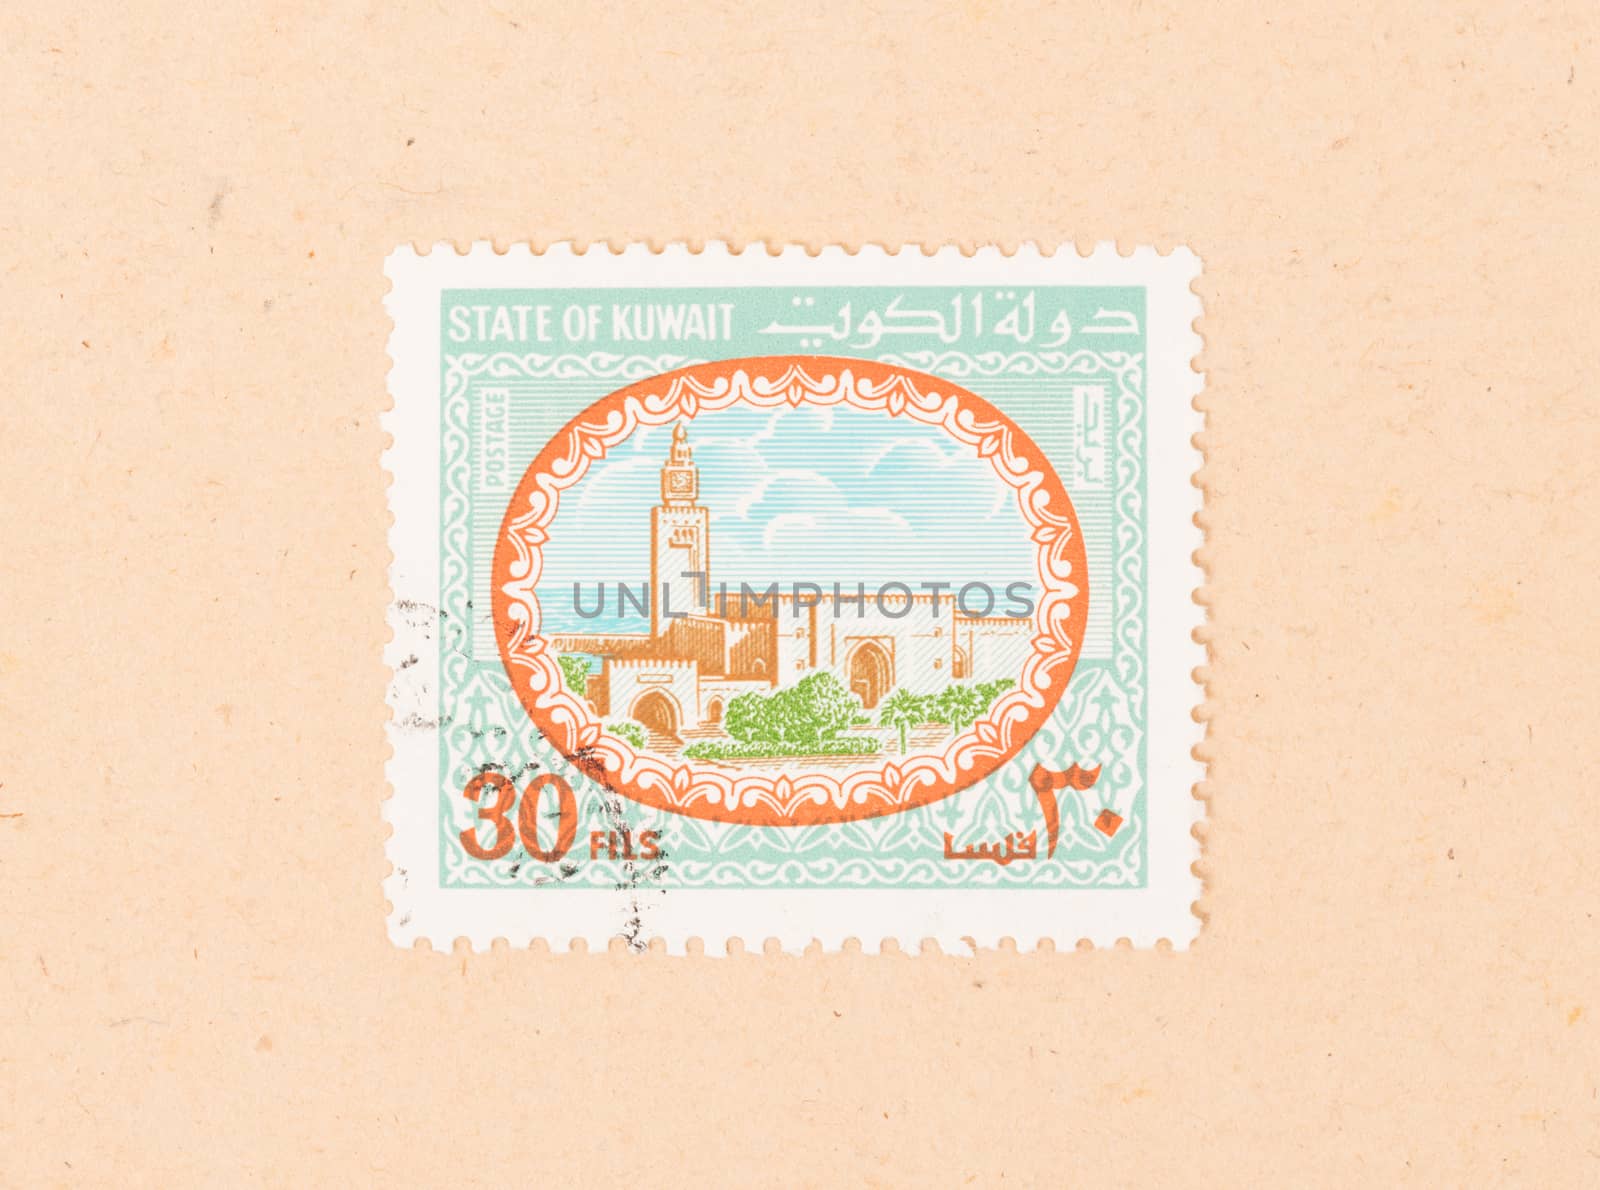 KUWAIT - CIRCA 1980: A stamp printed in Kuwait shows an old building, circa 1980